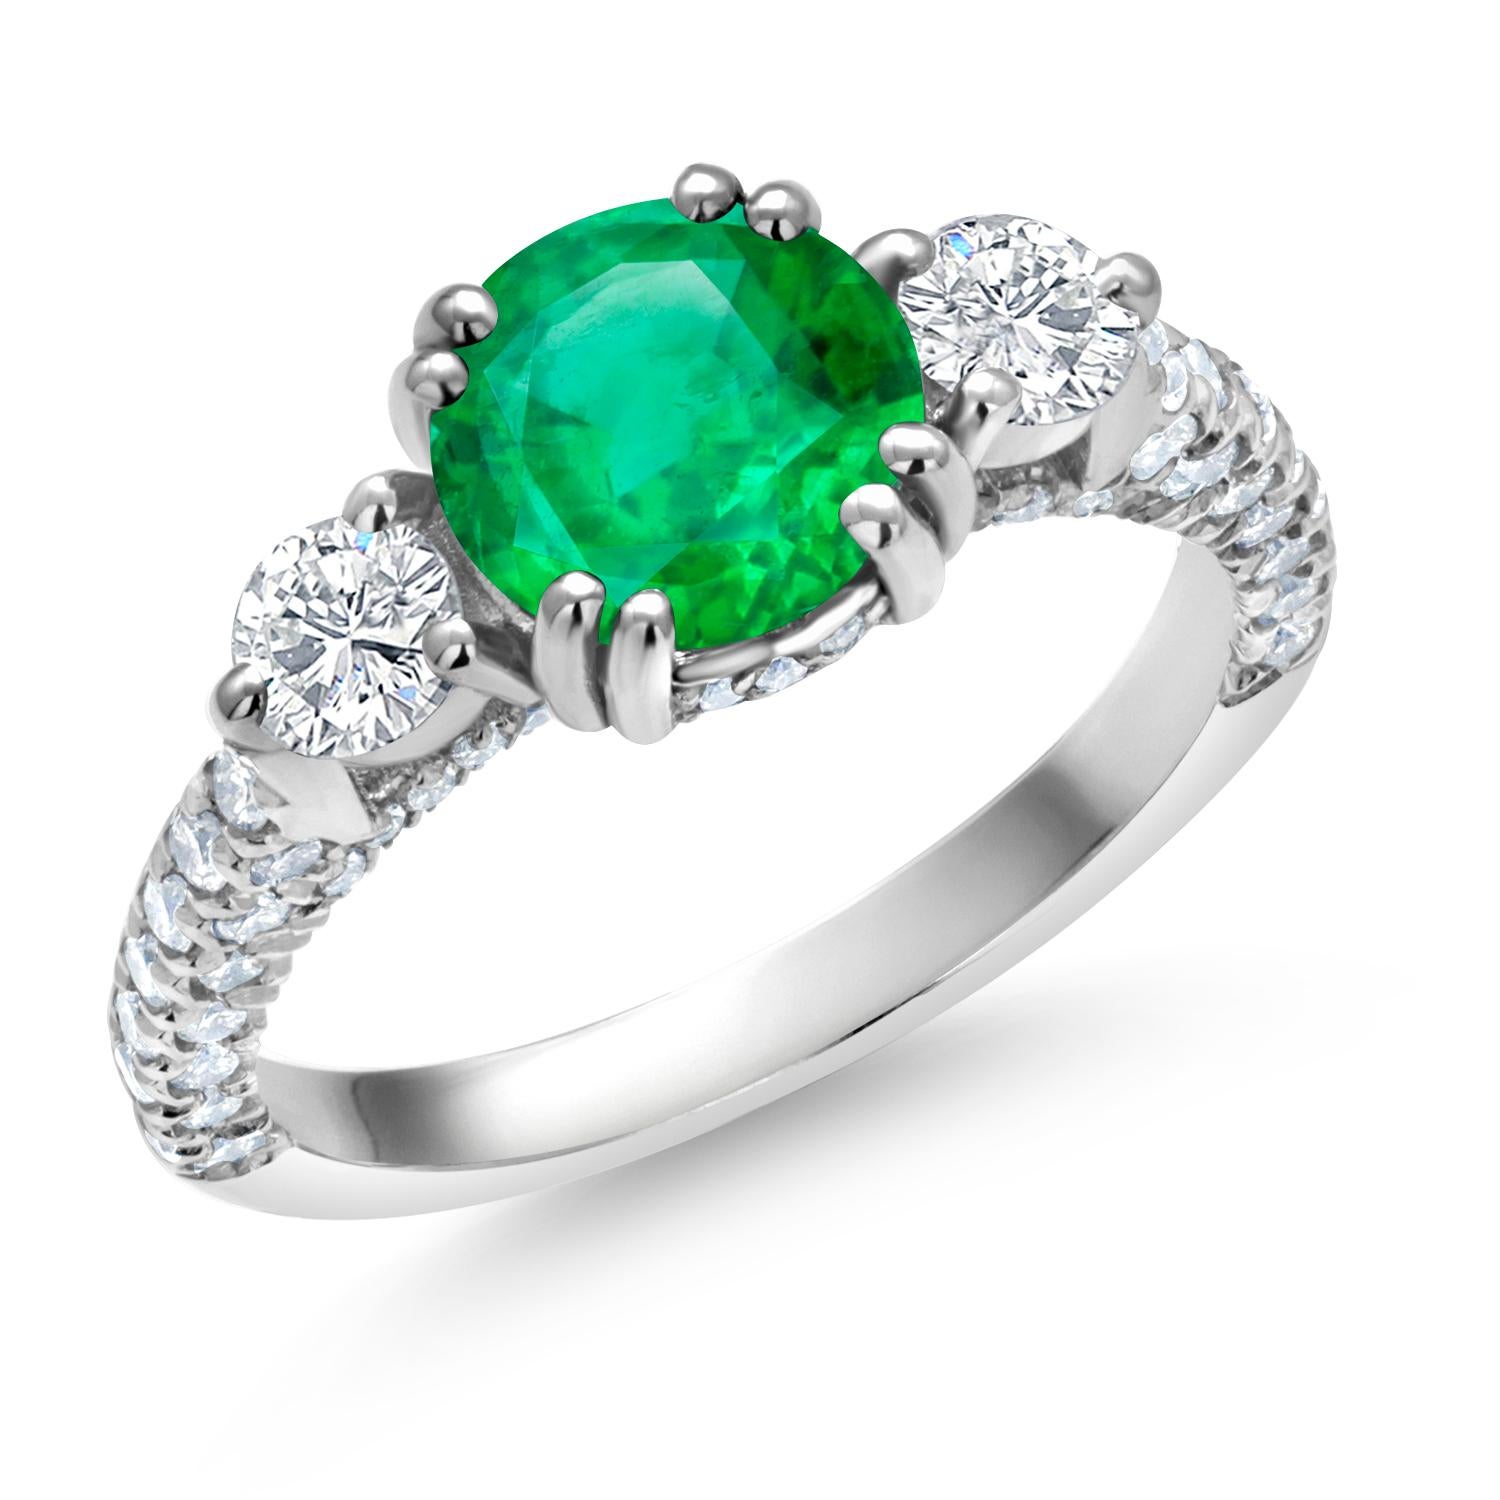 GIA Certified Colombian Emerald Diamond 2.85 Carat 18 Karat Gold Cocktail Ring For Sale 4